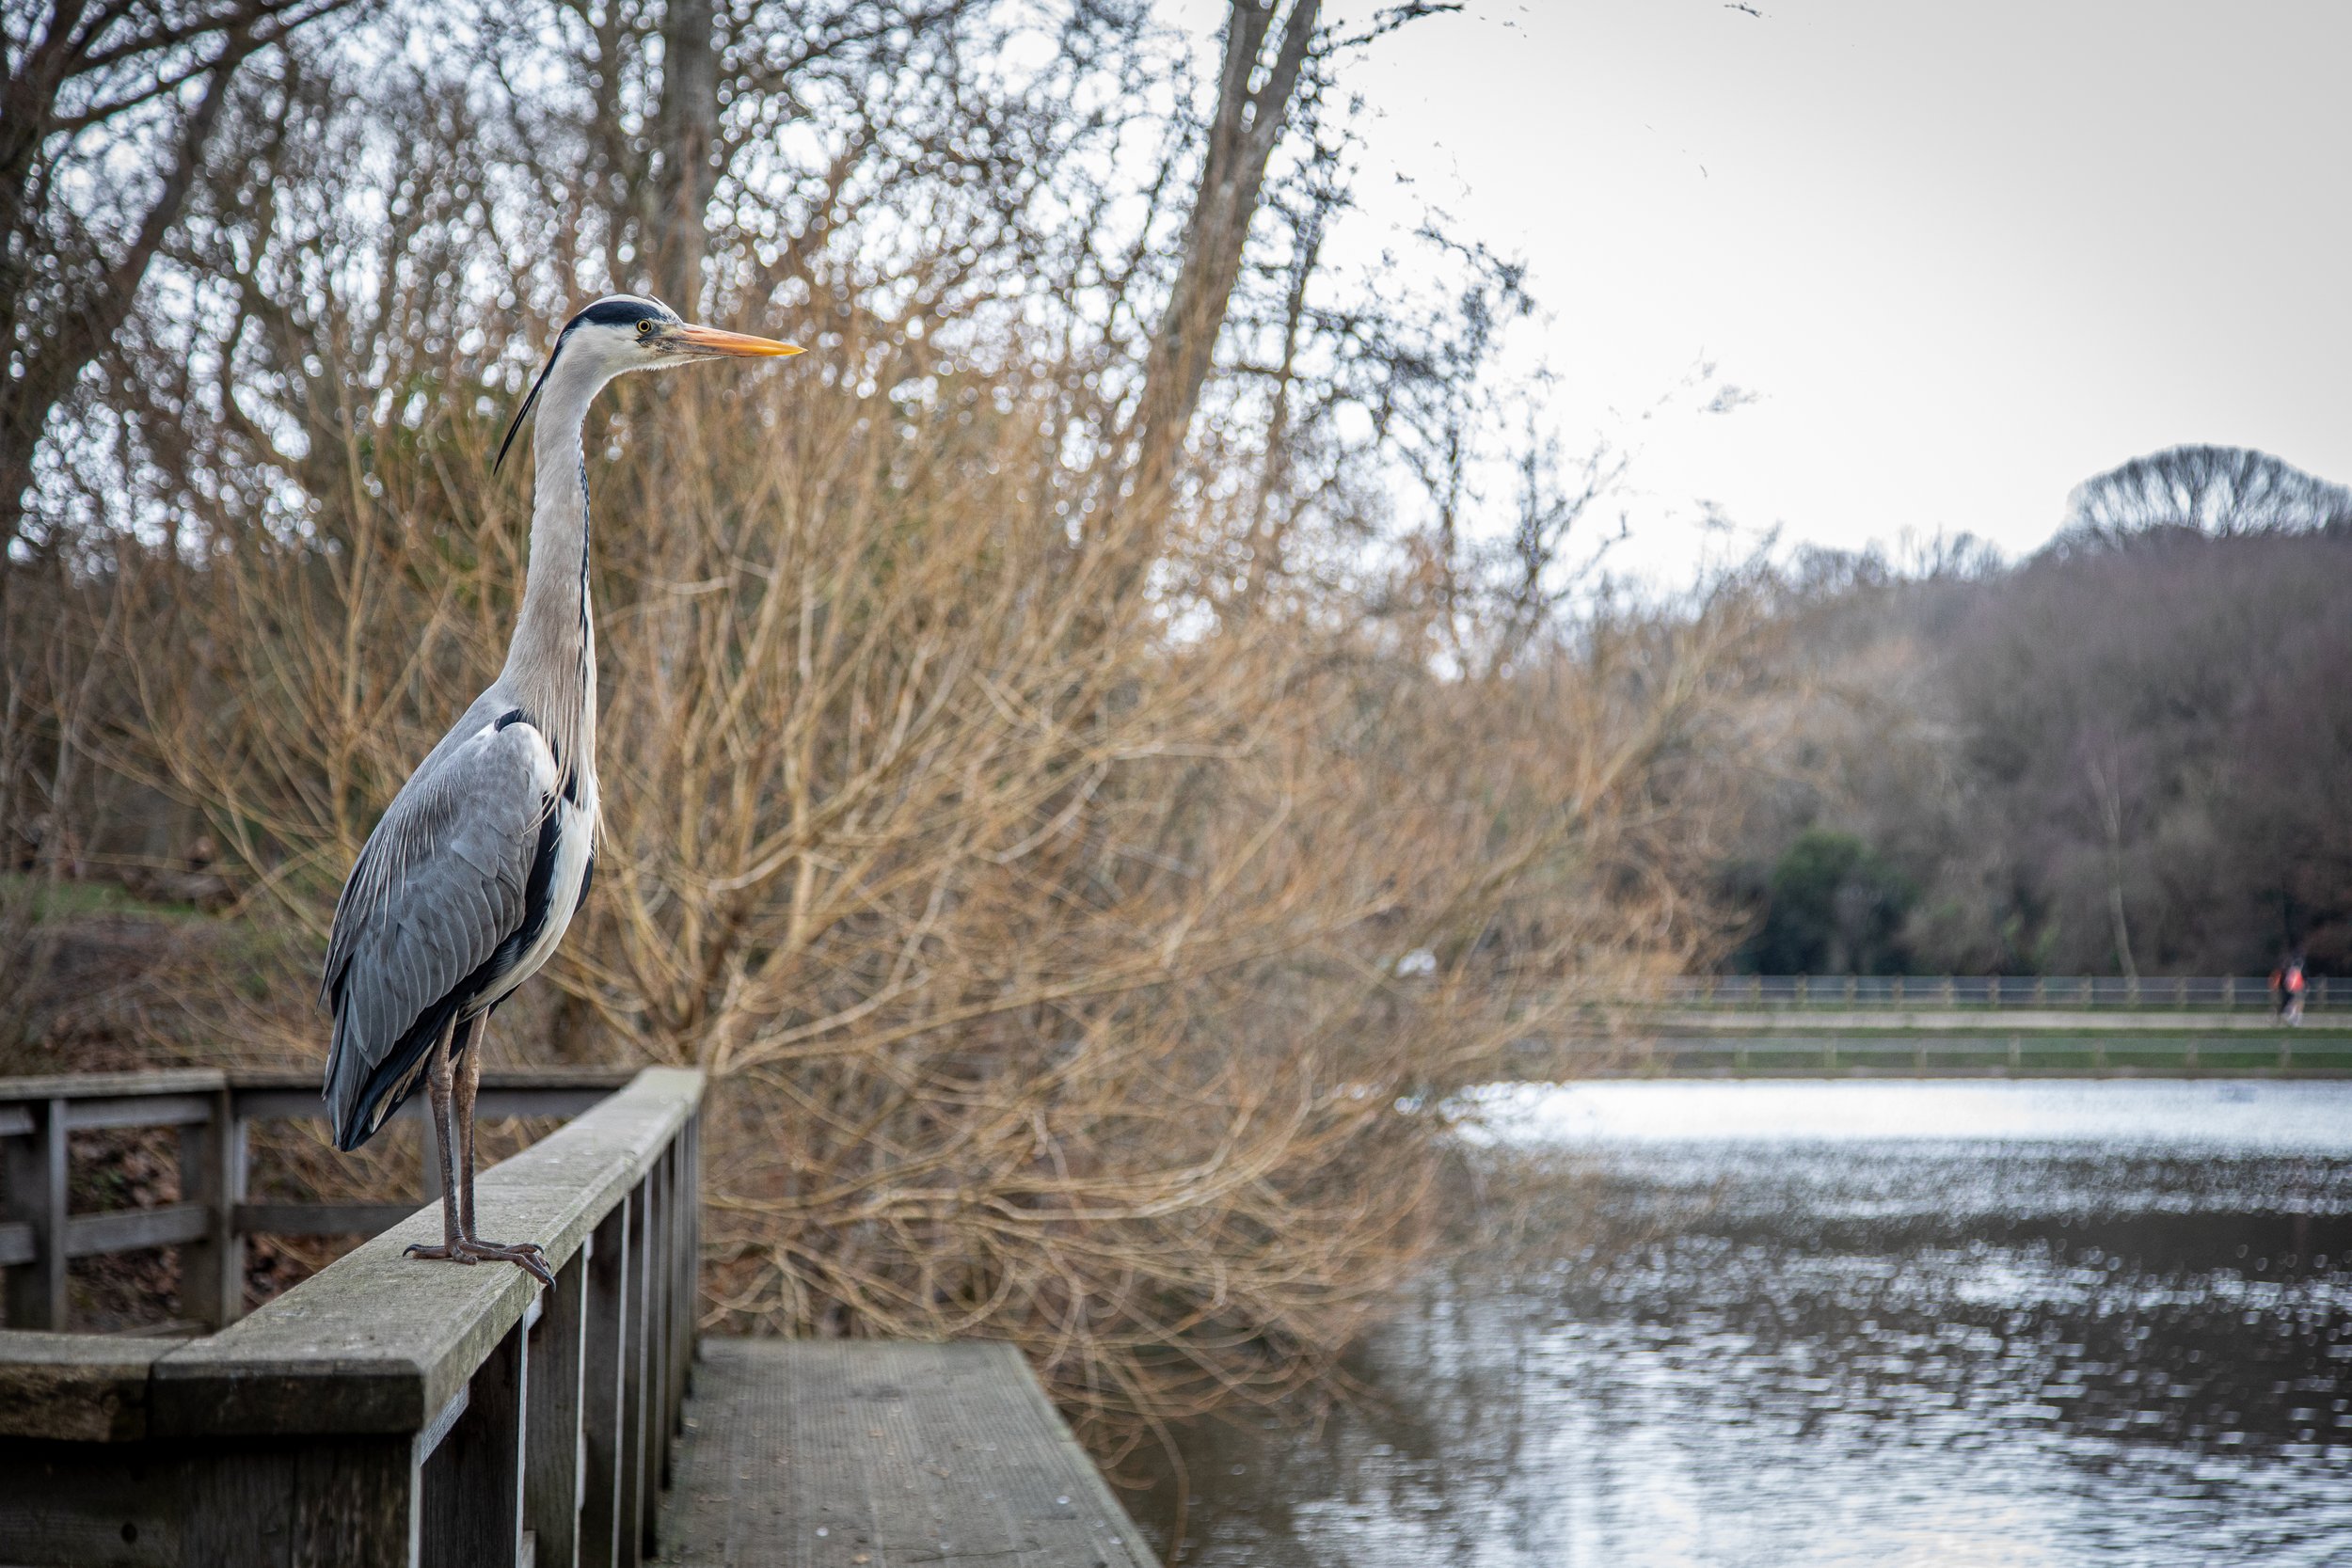 A very low-temperature heron who is clearly used to being papped